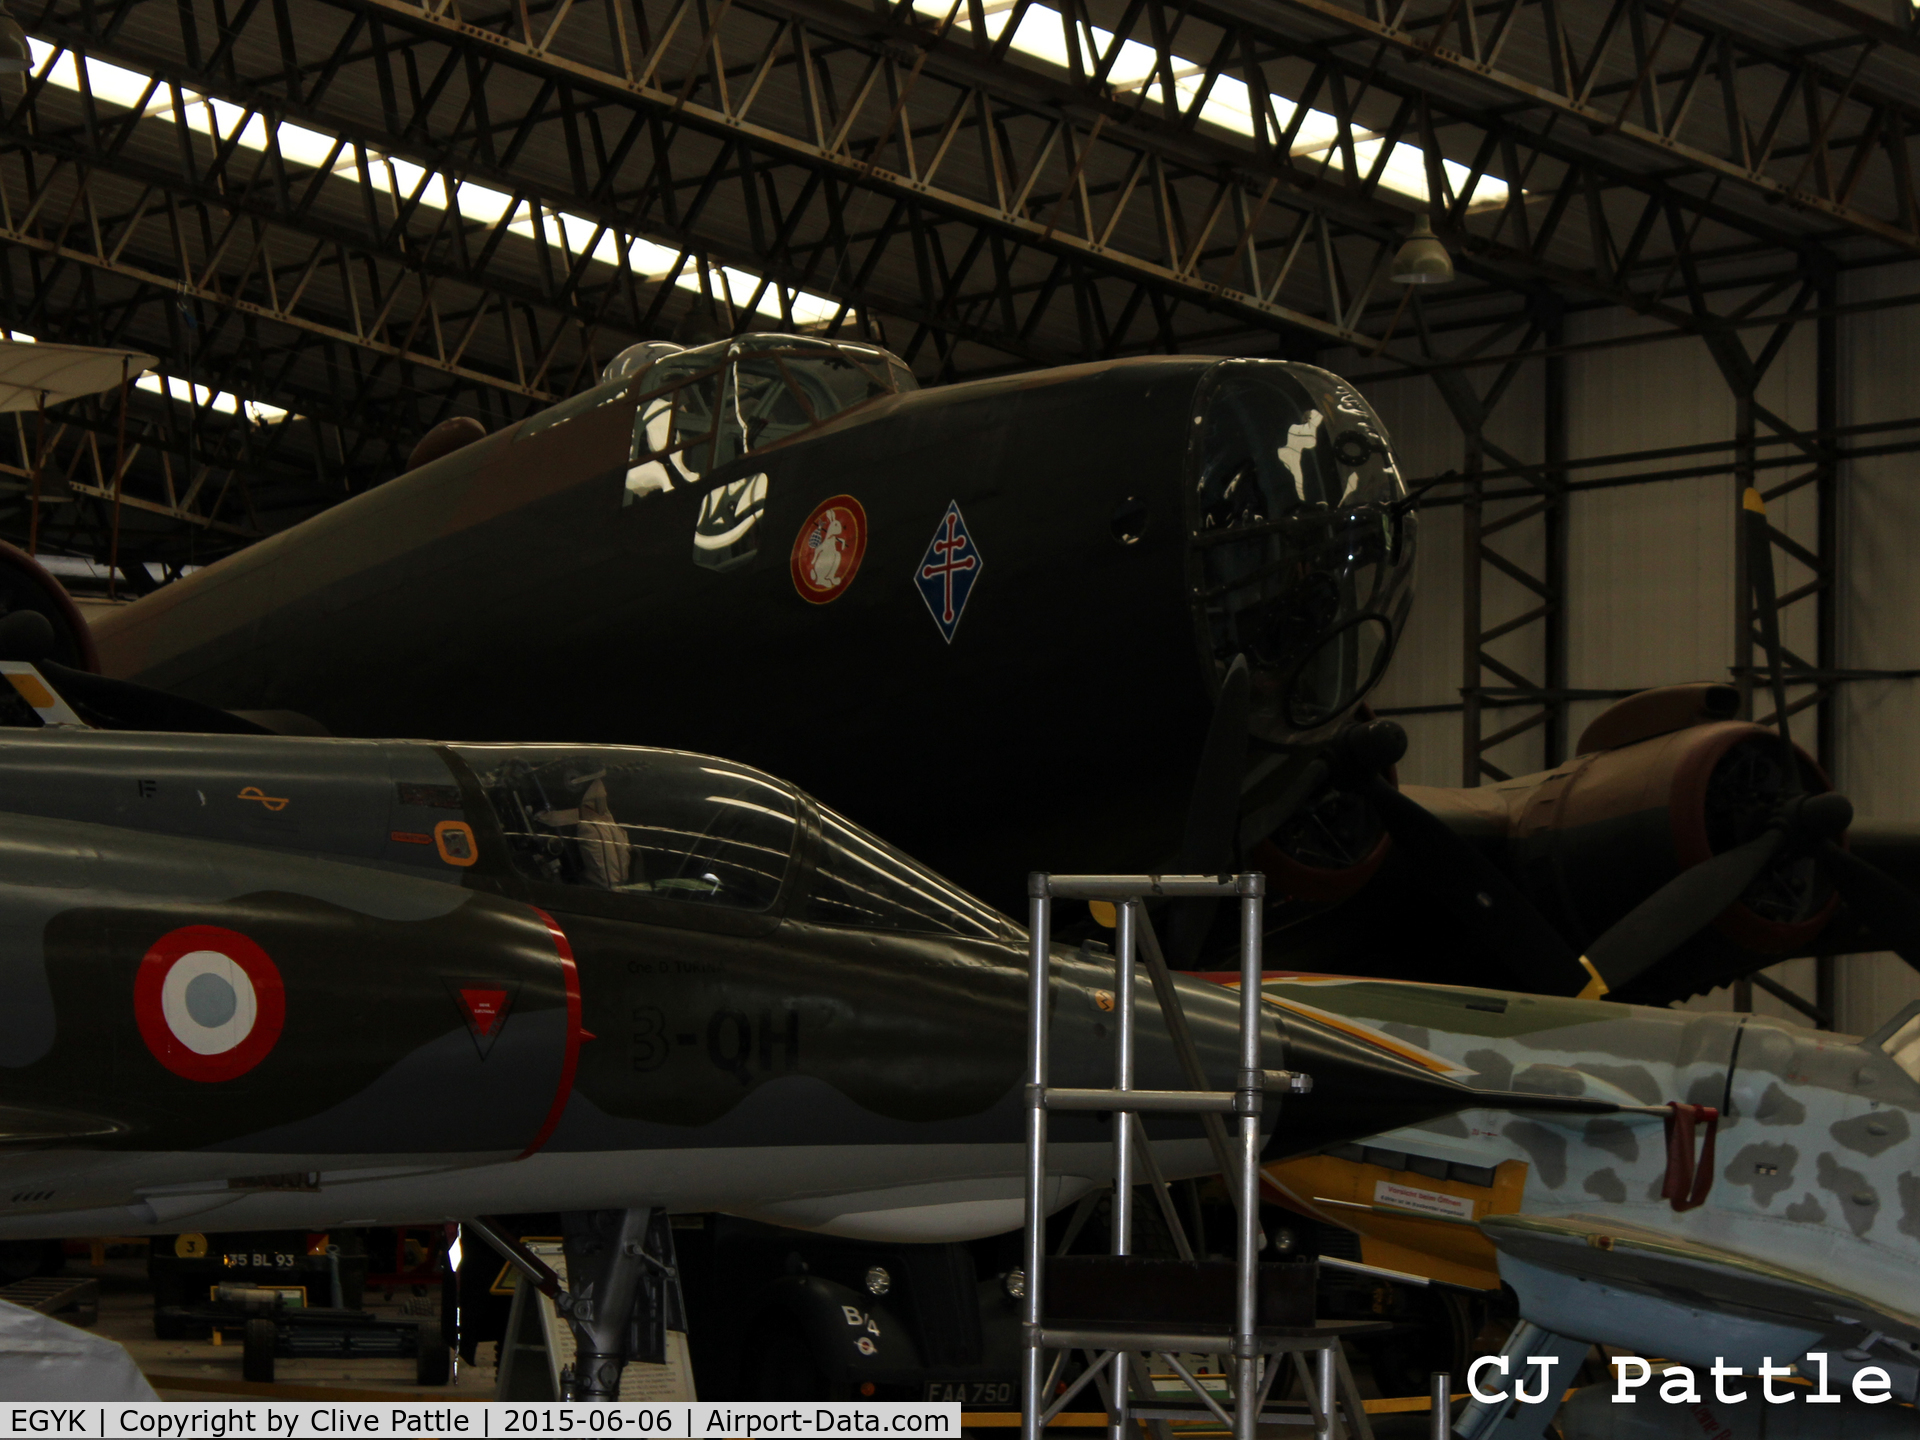 EGYK Airport - A shot of part of the main hangar display at the Yorkshire Air Museum, Elvington, Yorks, UK former EGYK